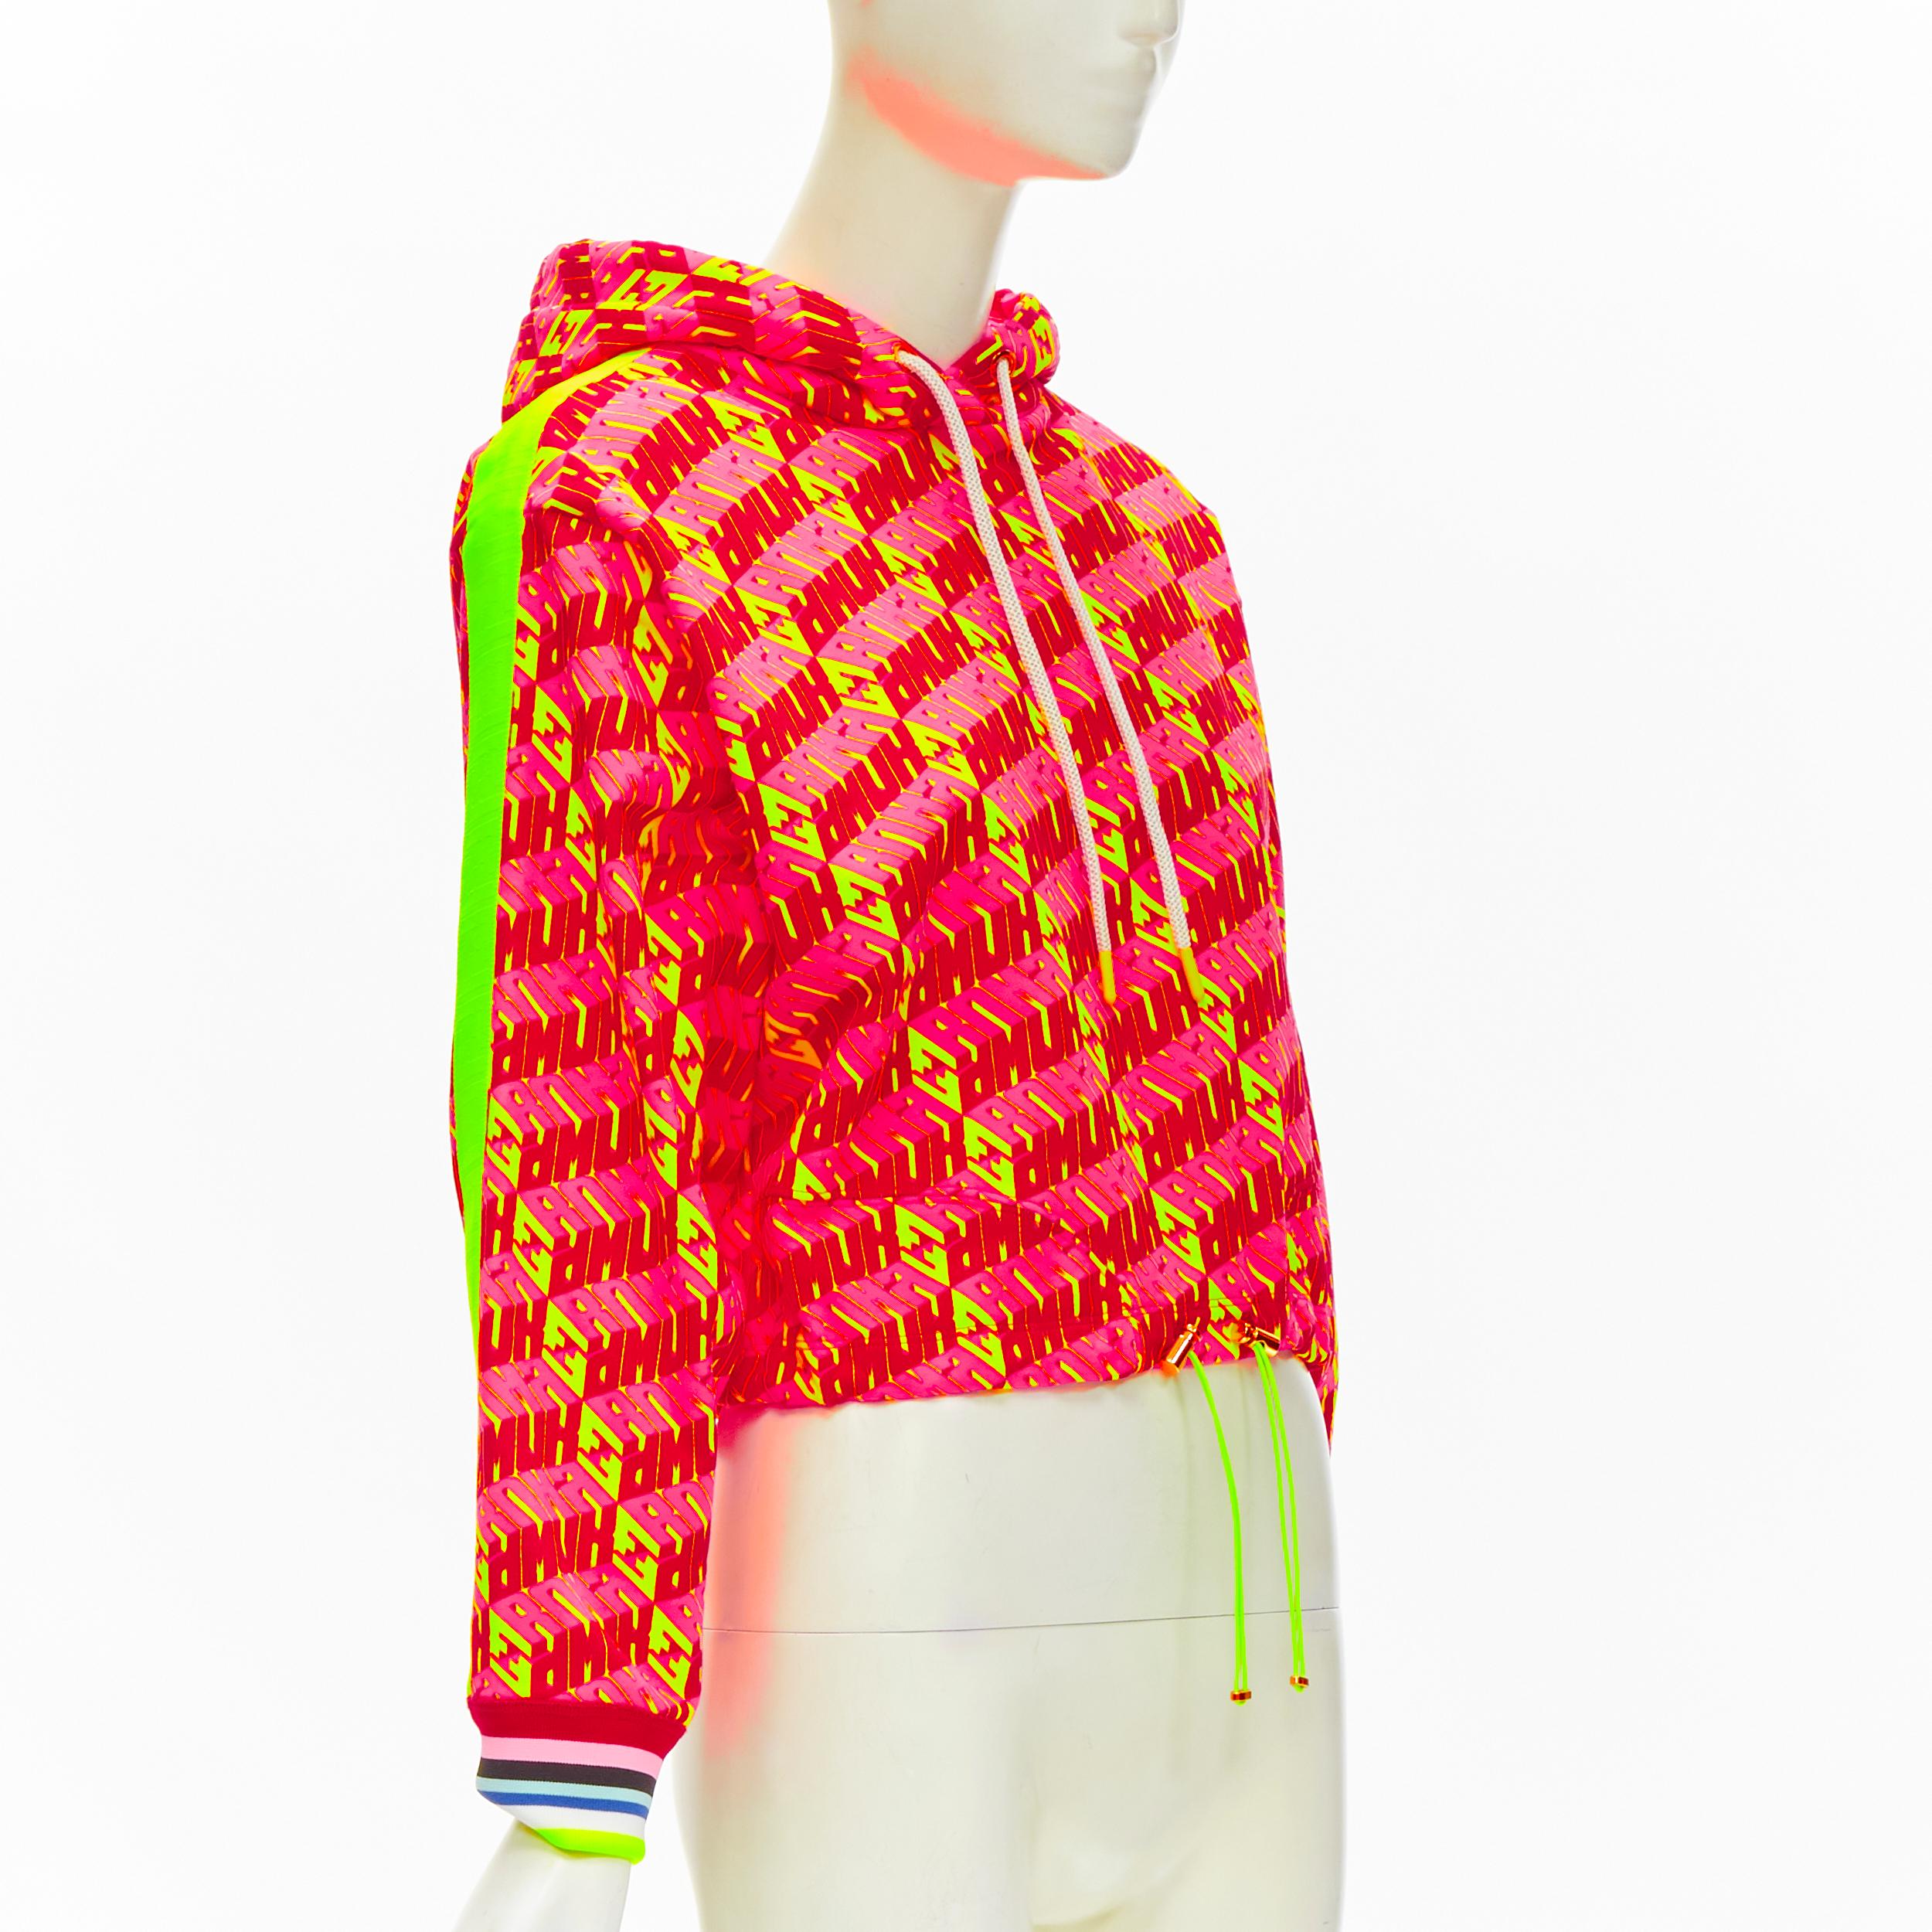 new FENDI Roma Amor neon pink yellow FF Zucca monogram cropped hoodie XS
Brand: Fendi
Collection: Roma Amor 
Material: Cotton
Color: Pink
Pattern: Graphic
Closure: Drawstring
Extra Detail: Rubberized tips. Gold-tone hardware. Toggle drawstring at